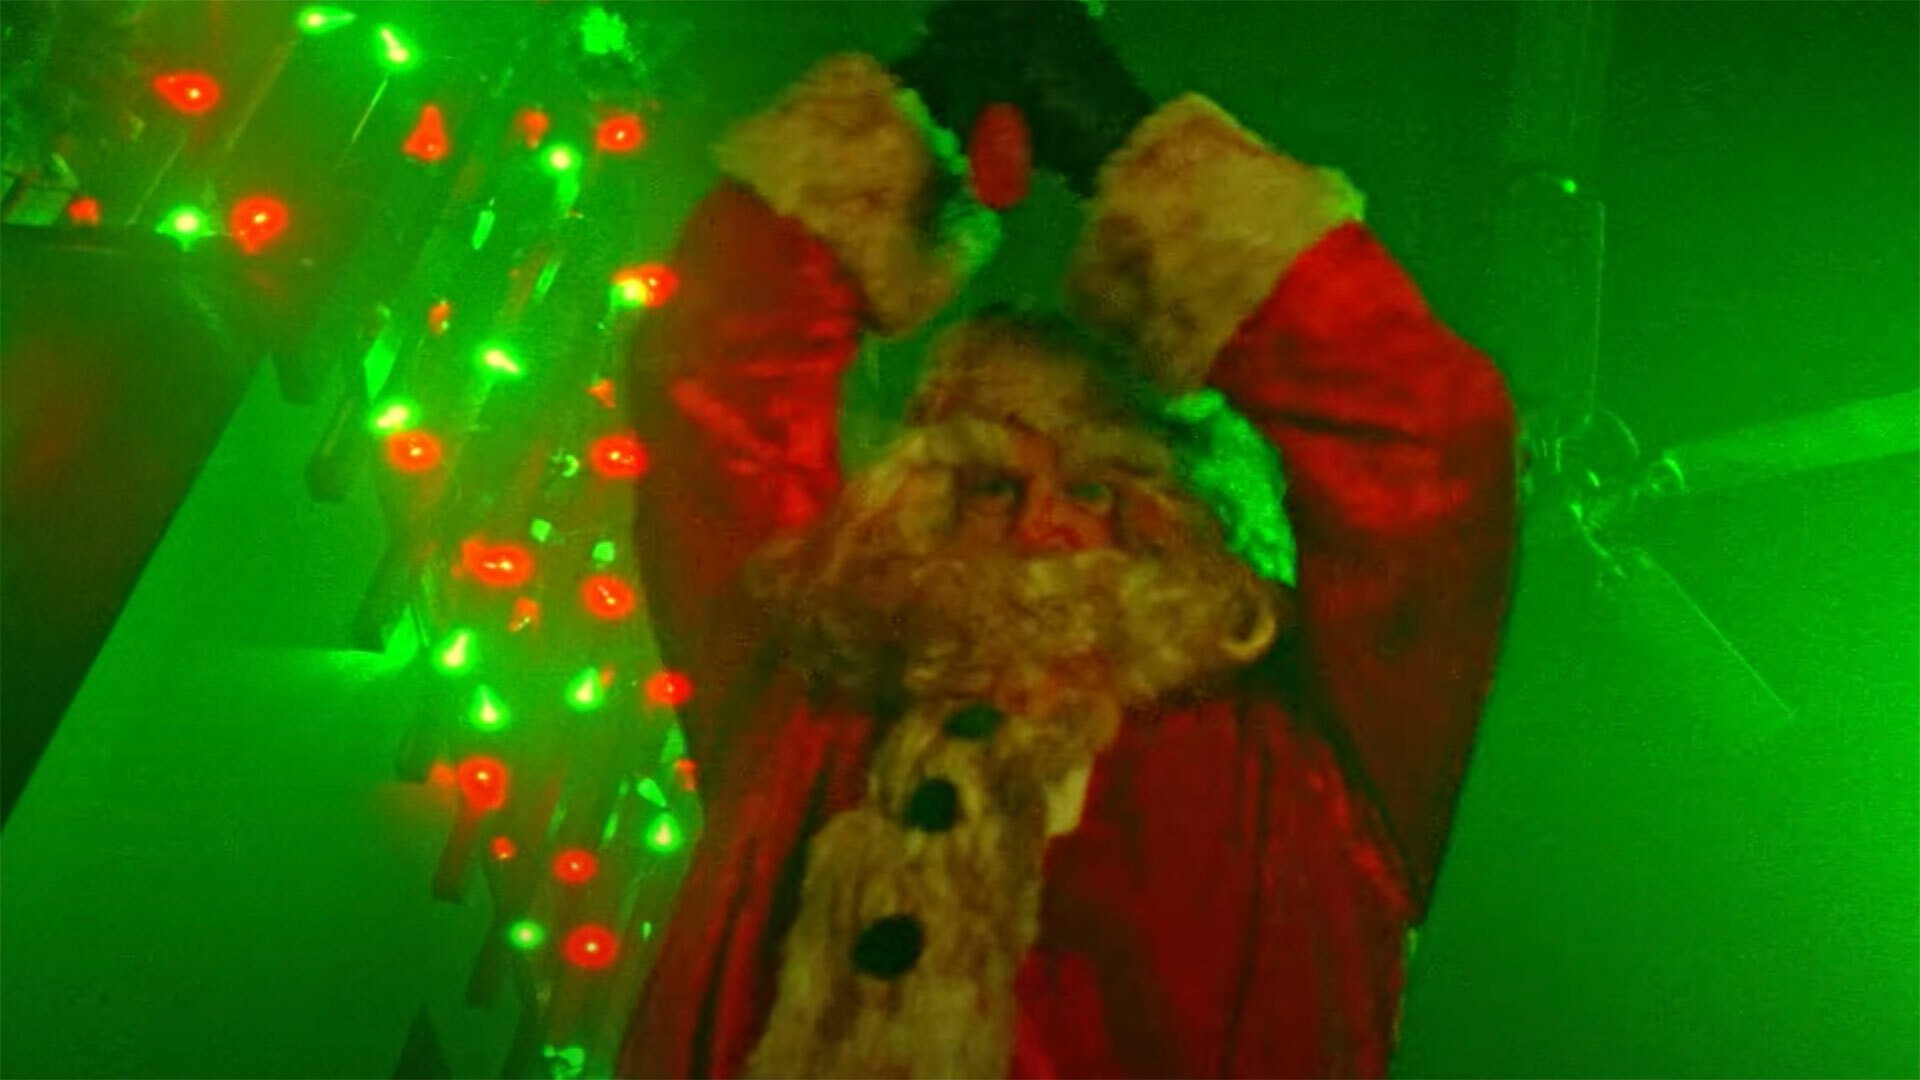 A man in a Santa Claus outfit with blood on his beard raises an axe over his head.